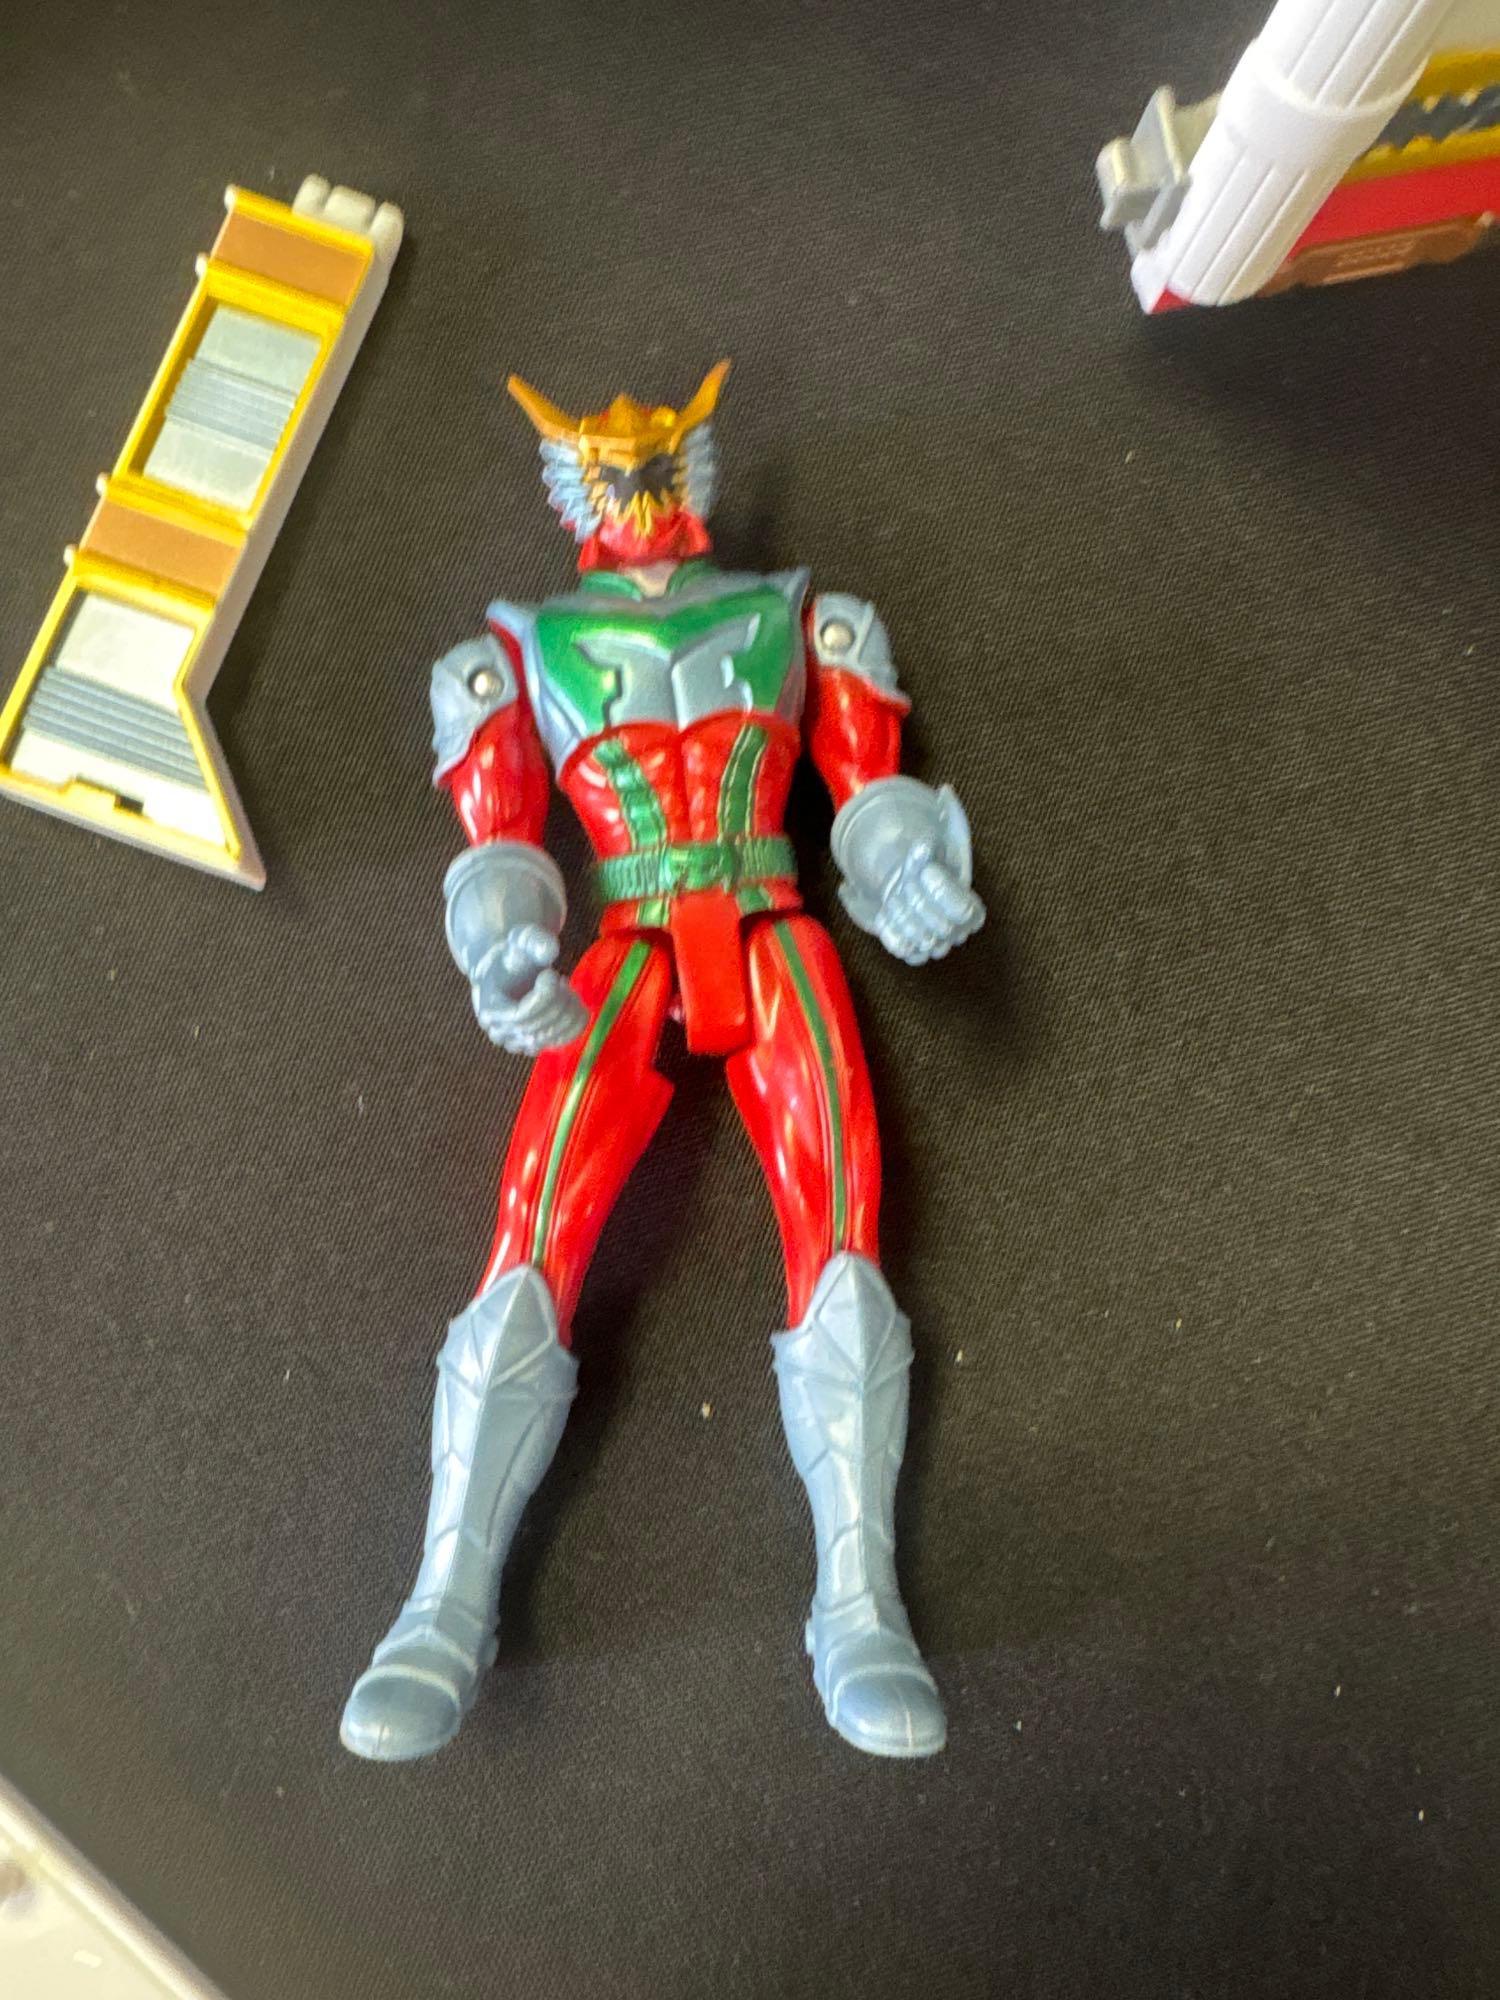 Power Rangers Mystic Force Dragon Rootcore Command Center with contents shown